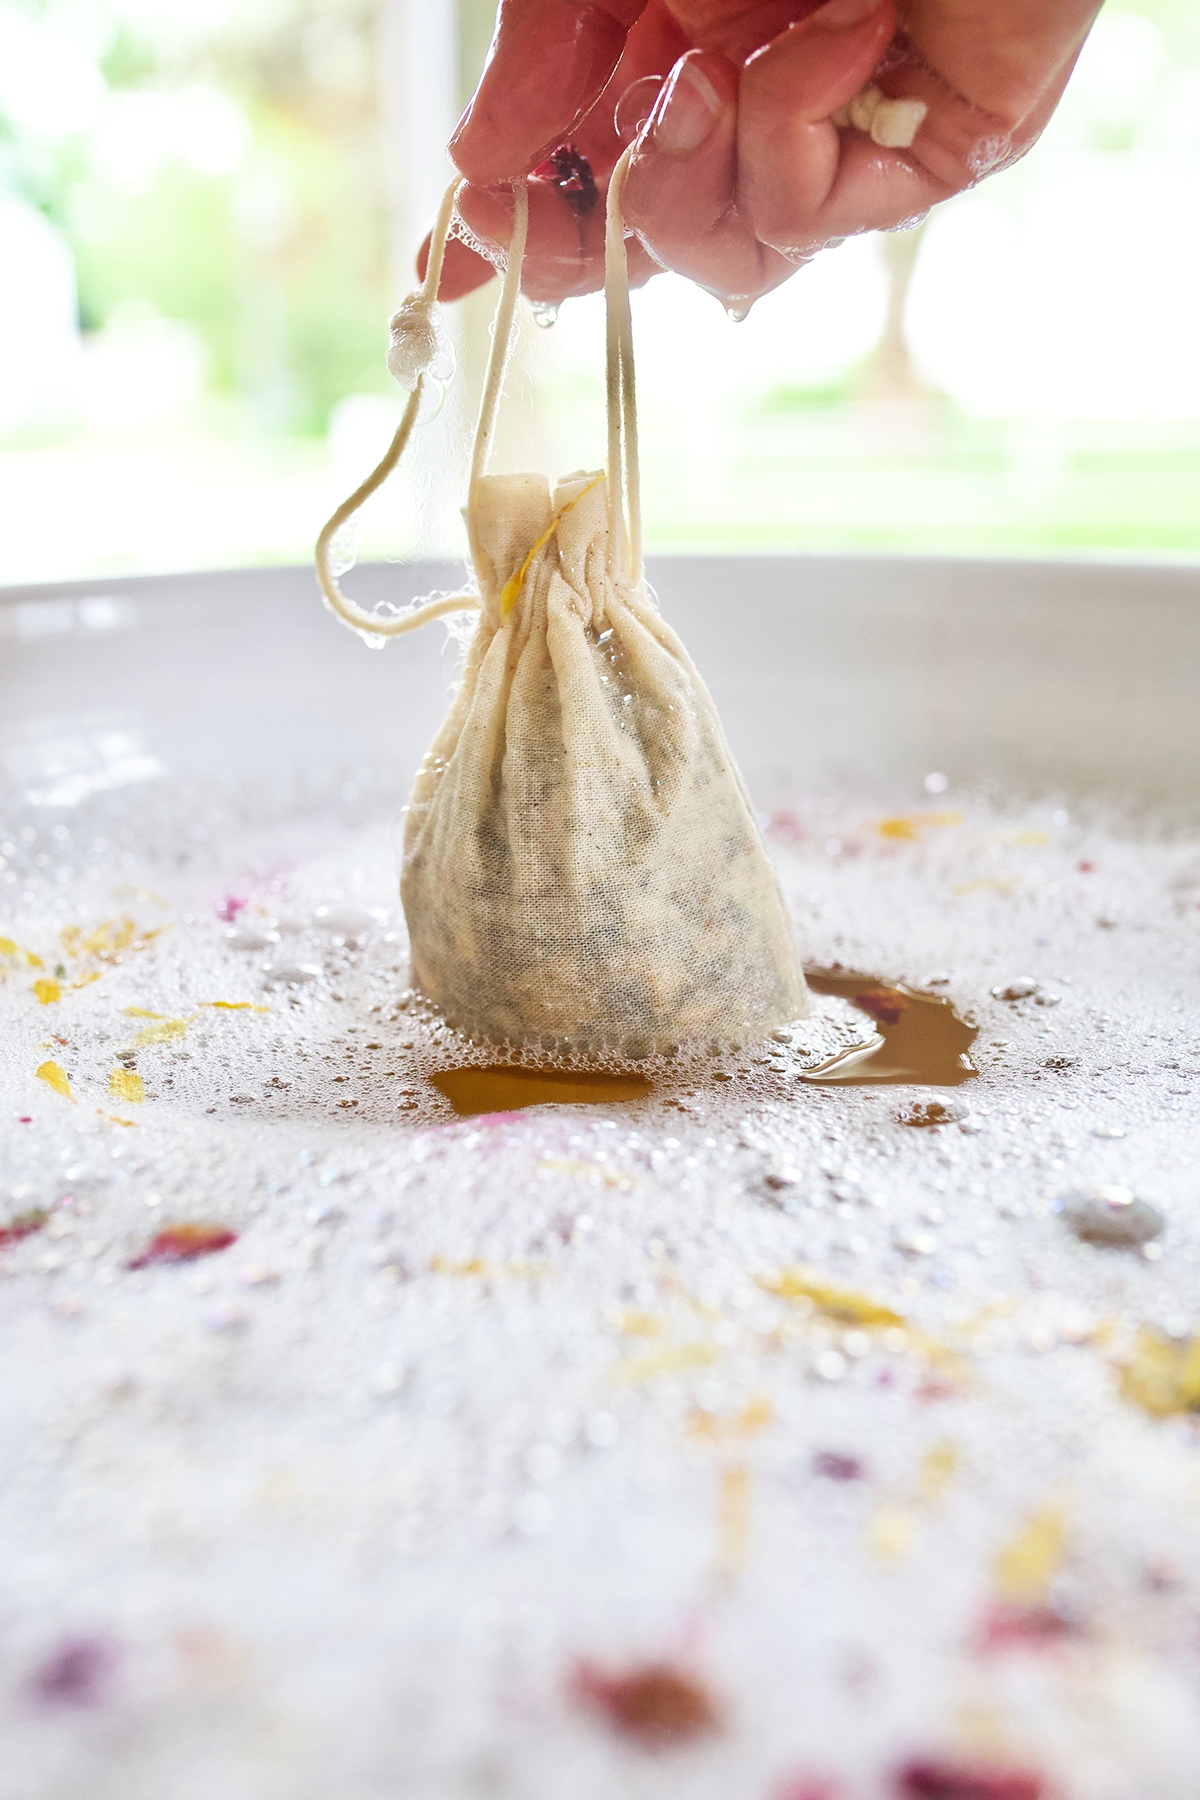 How To Make A Summer Garden Bath Tea | Herbal Academy | A summer garden bath tea is a great way to unwind. Here are our top five herbs to include plus tips for planting, growing, and harvesting these herbs too!